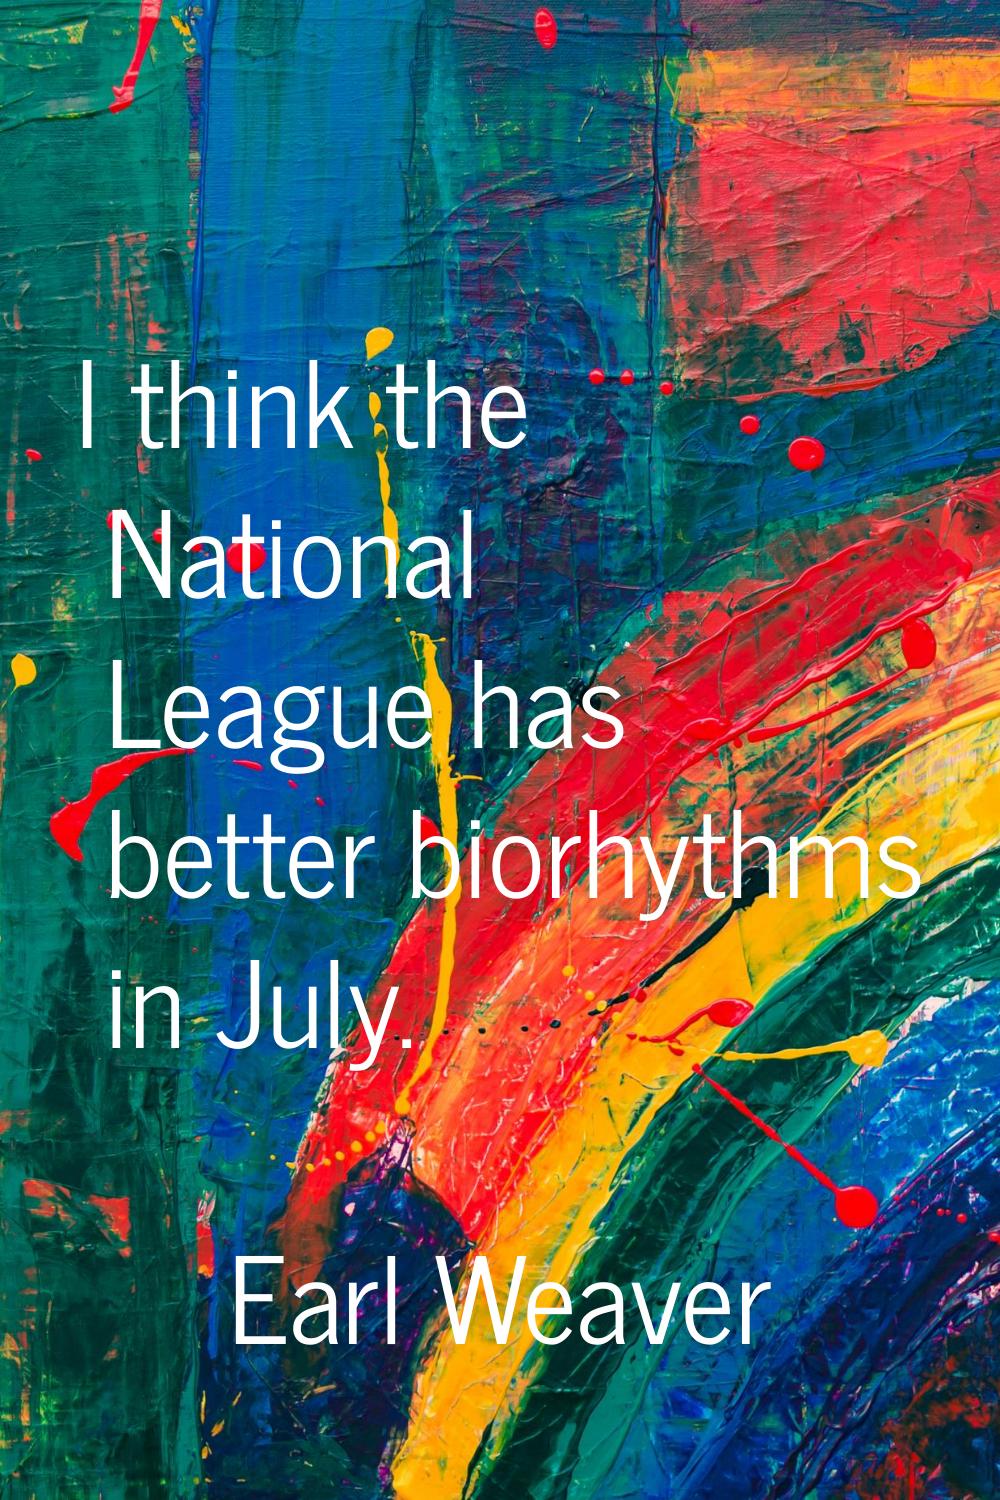 I think the National League has better biorhythms in July.